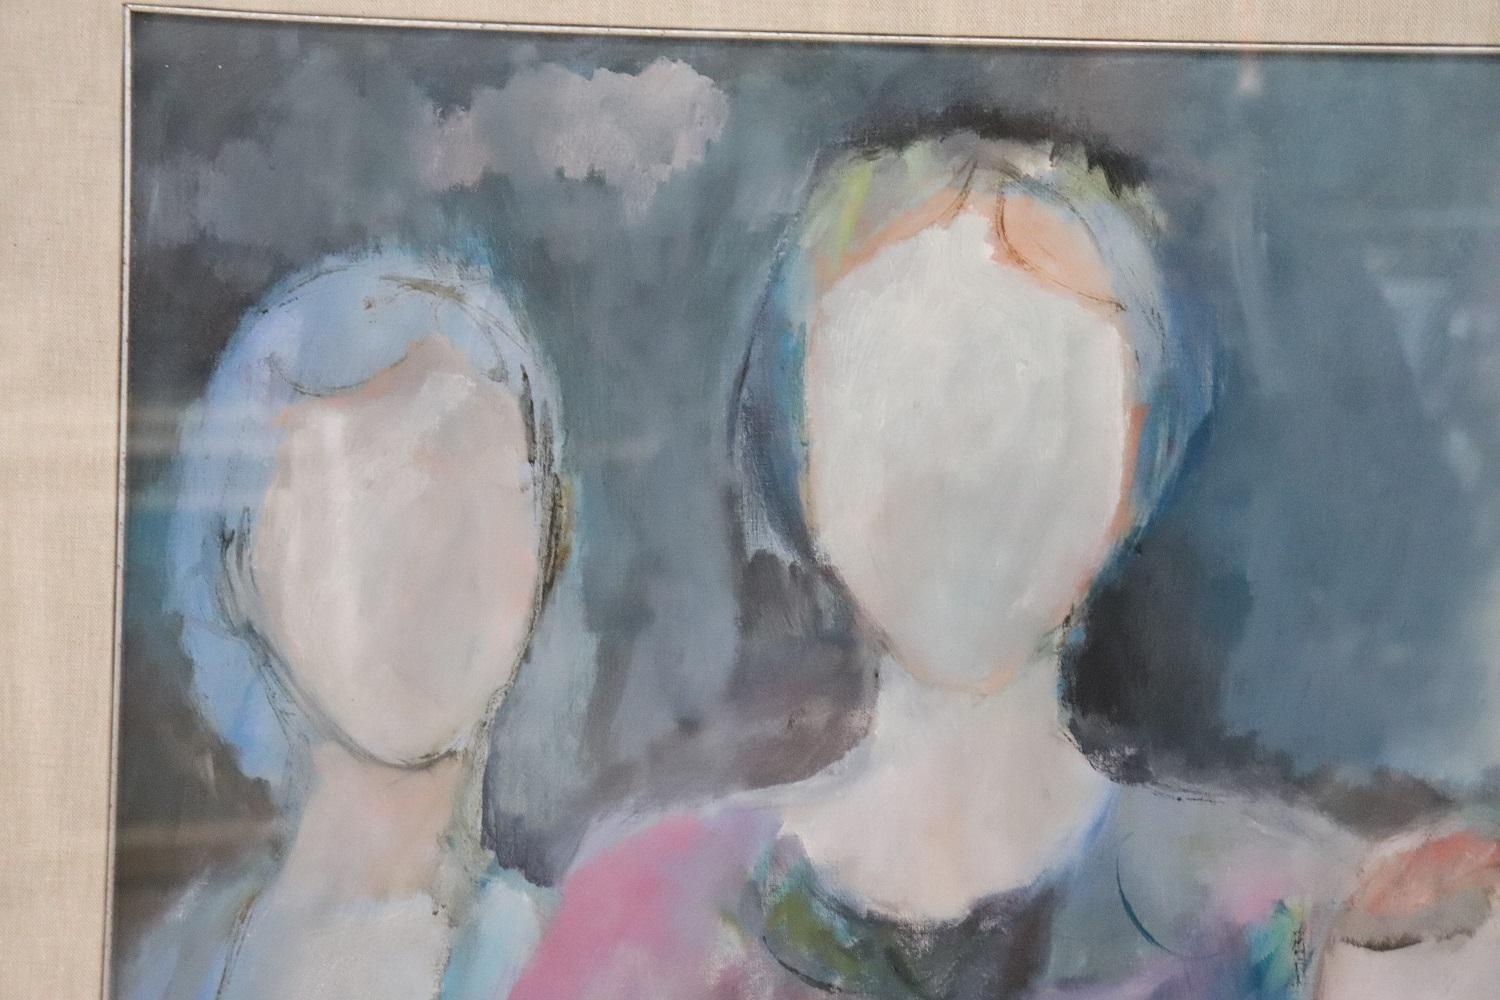 Beautiful Italian oil painting on canvas, dated 1973 and signed by the artist Giuliana Pardini. 
Giuliana Pardini was born in 1937 and works in Viareggio (Italy), she exhibited for the first time in her city in 1969 and subsequently set up personal